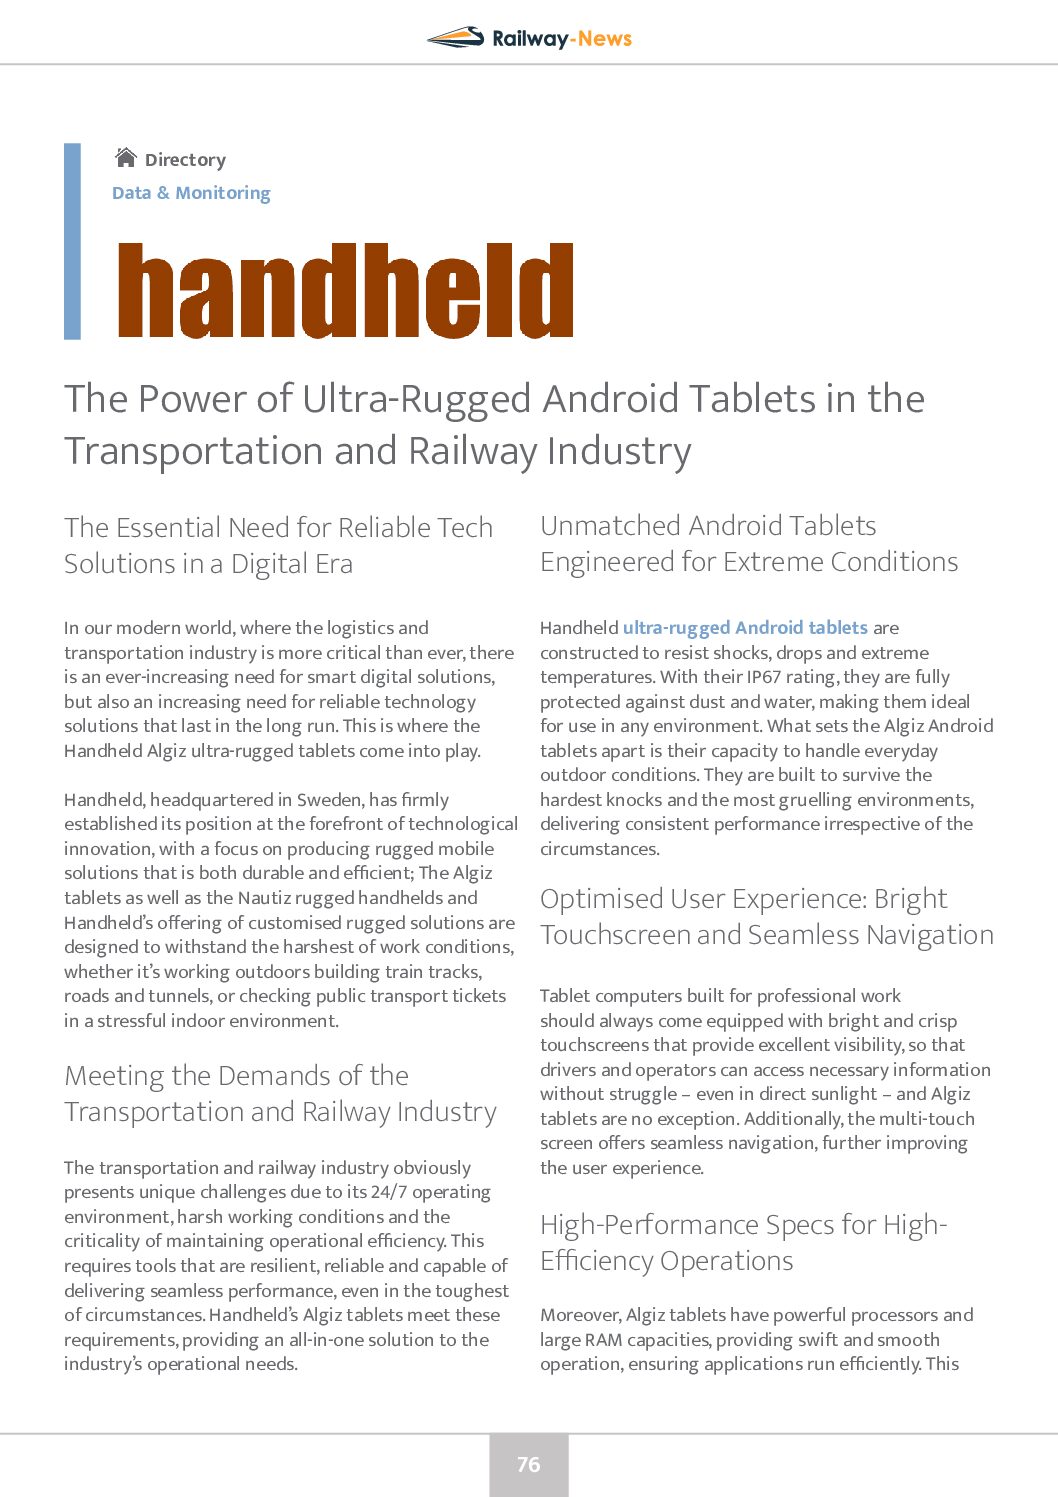 The Power of Ultra-Rugged Android Tablets in the Transportation and Railway Industry